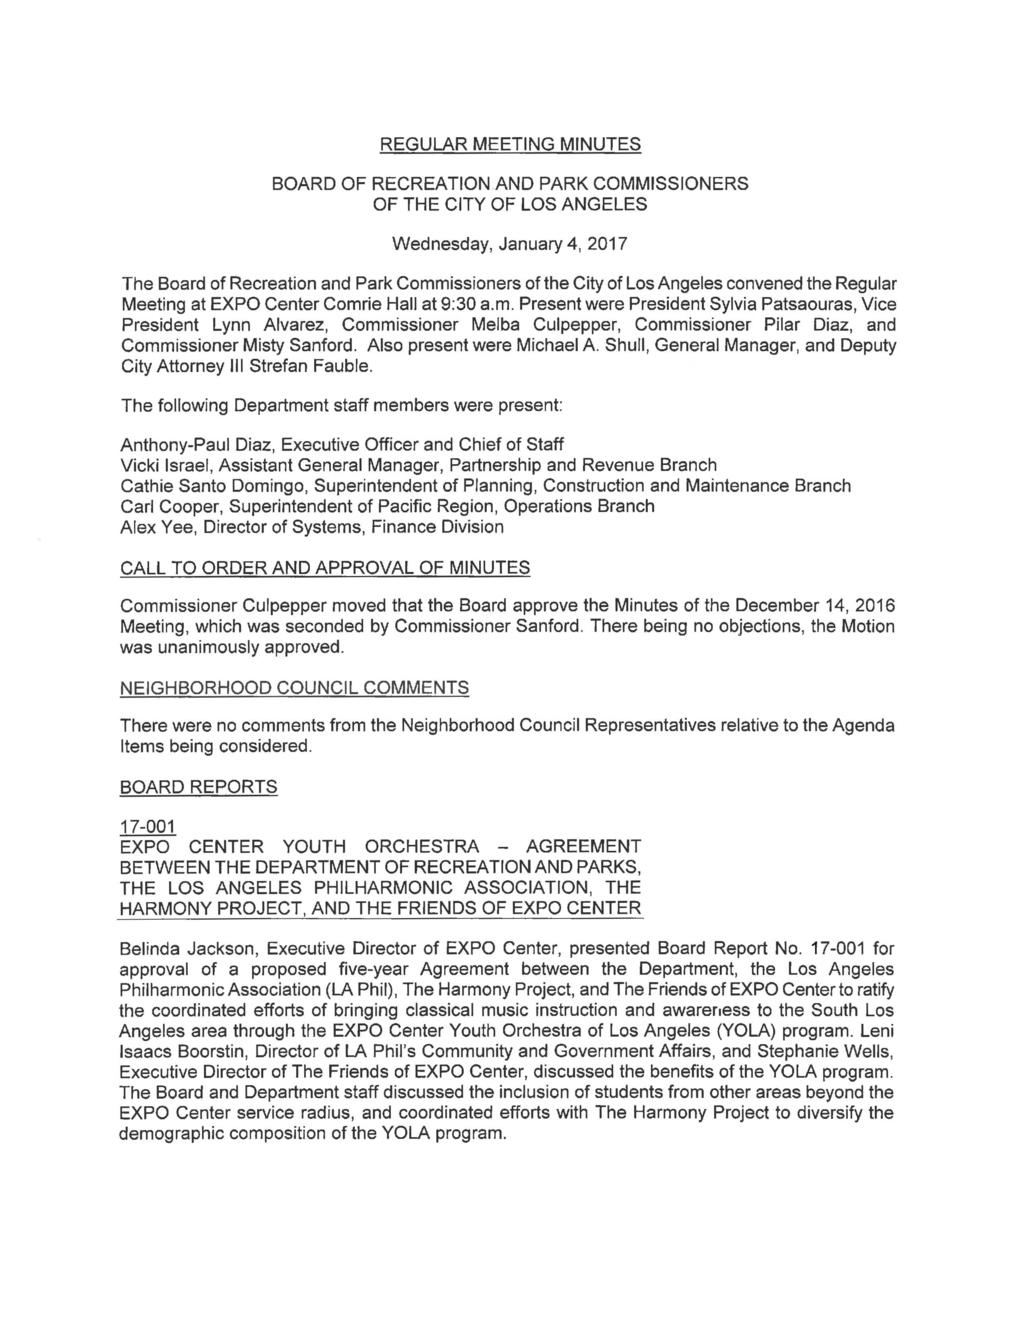 REGULAR MEETING MINUTES BOARD OF RECREATION AND PARK COMMISSIONERS OF THE CITY OF LOS ANGELES Wednesday, January 4, 2017 The Board of Recreation and Park Commissioners of the City of Los Angeles